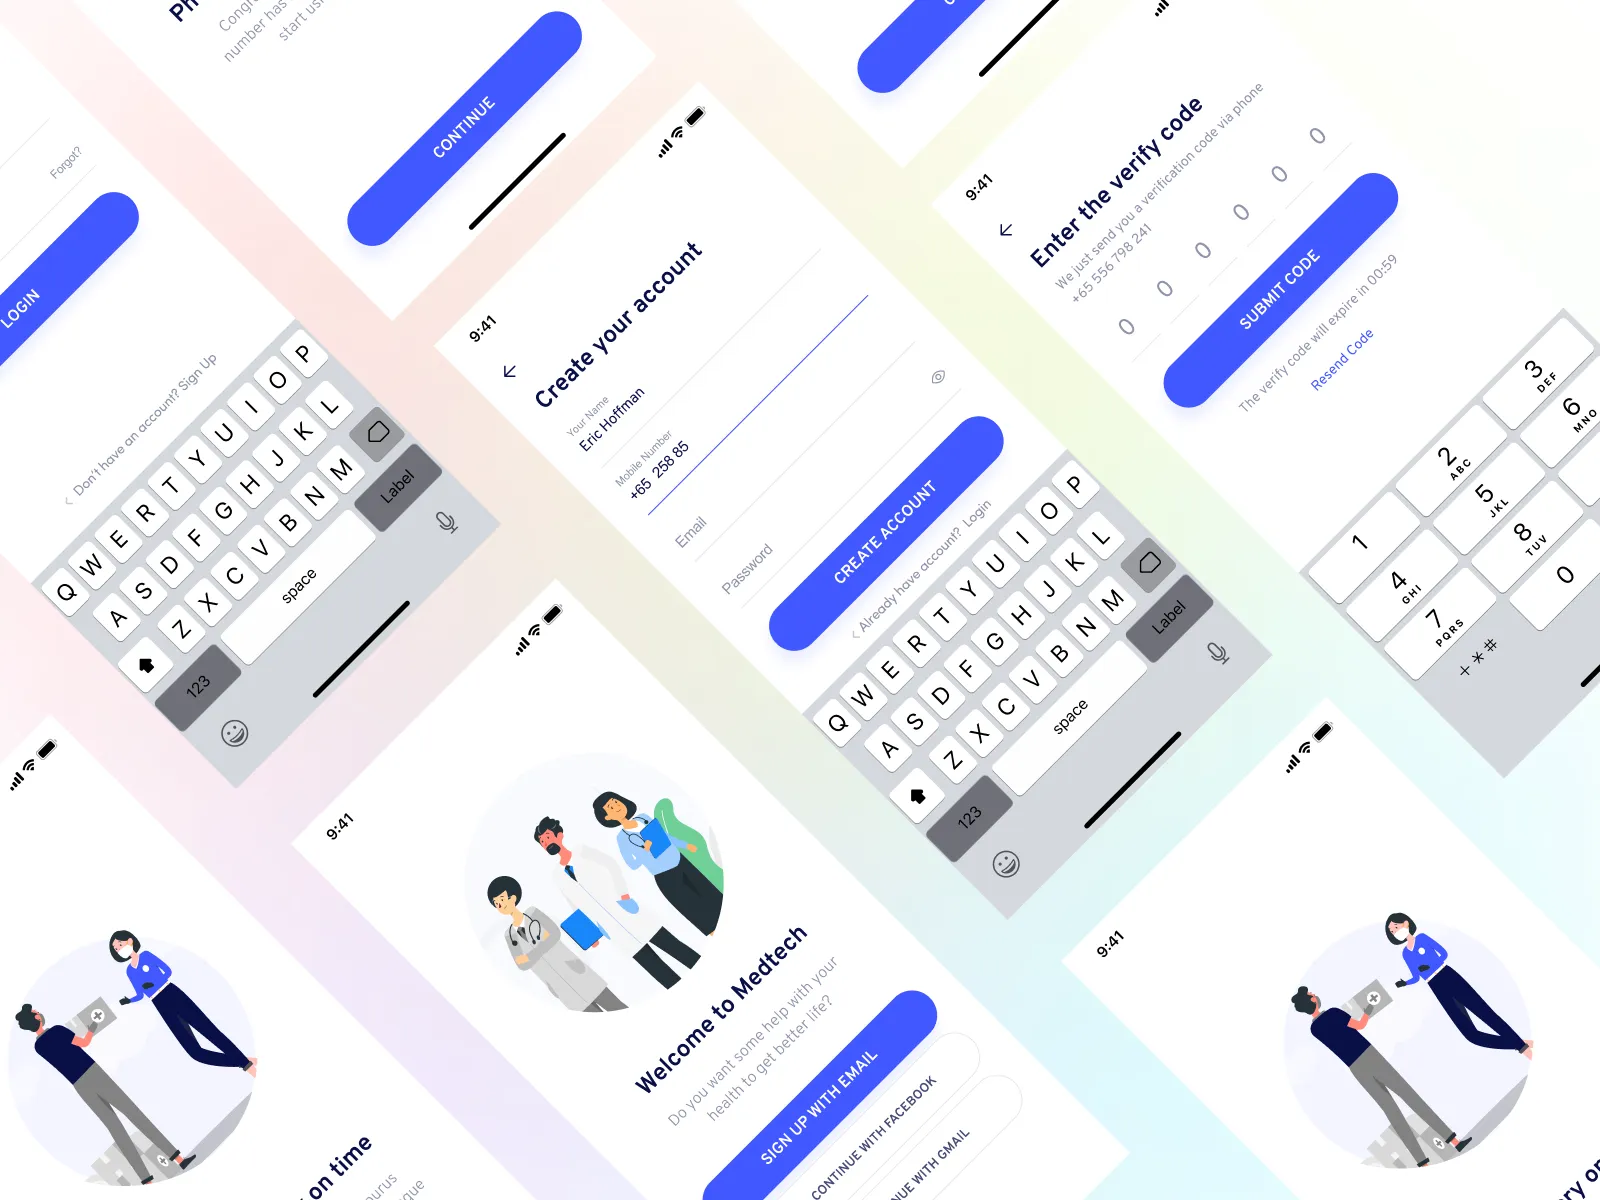 Online Medical Store App UI Kit for Figma and Adobe XD No 3